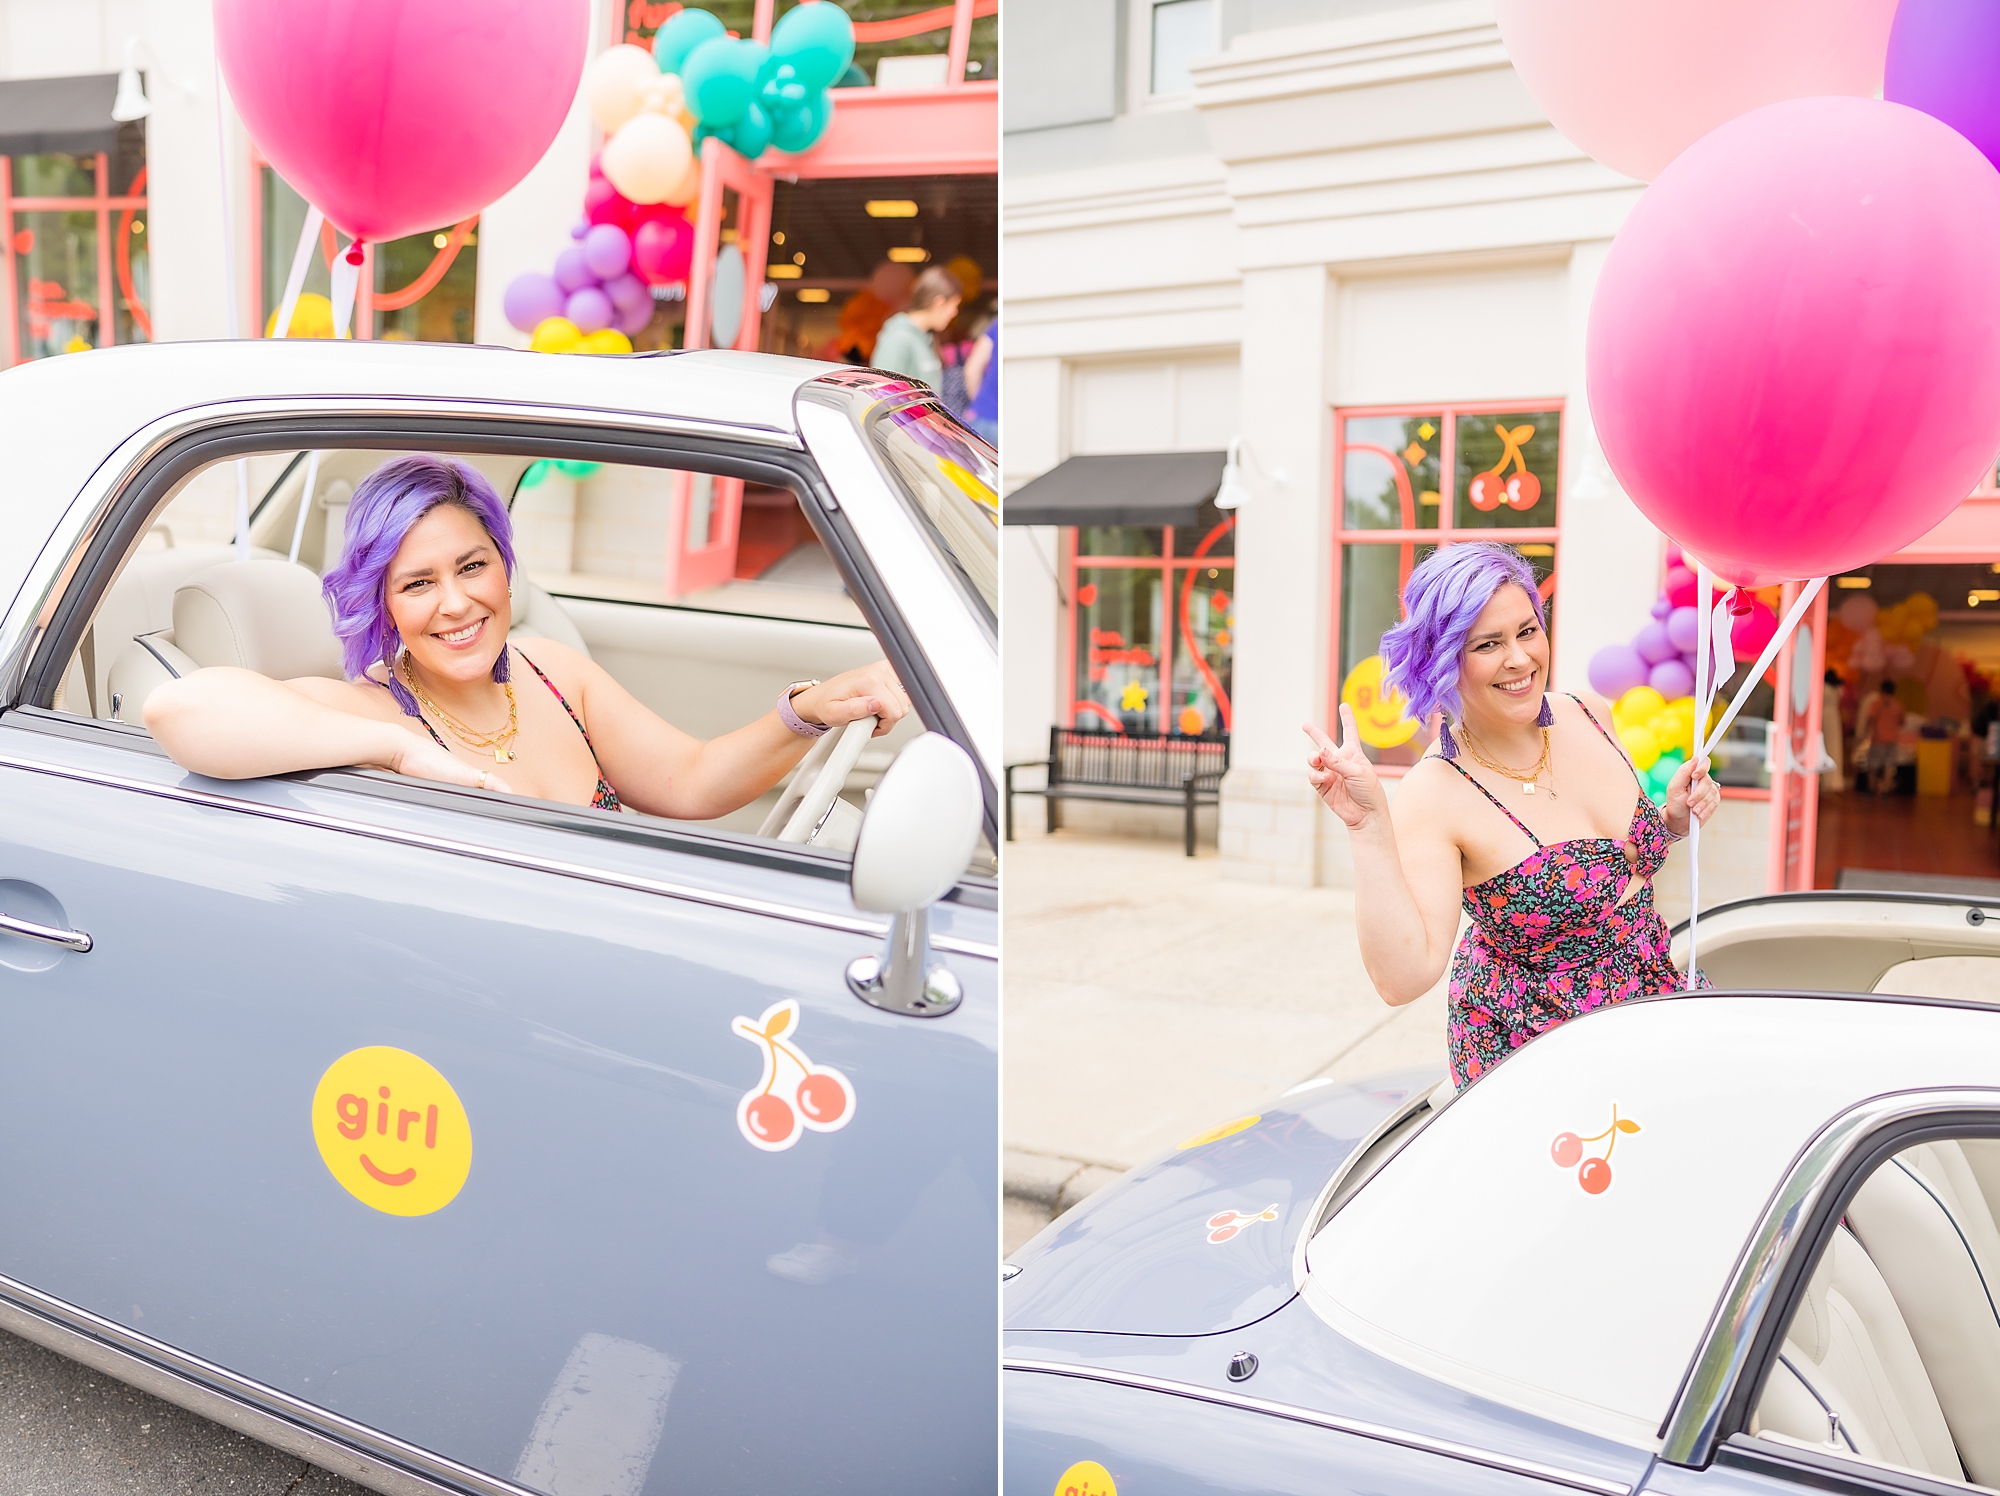 woman sits in purple car outside Girl Supply during branding photos in Birkdale Village